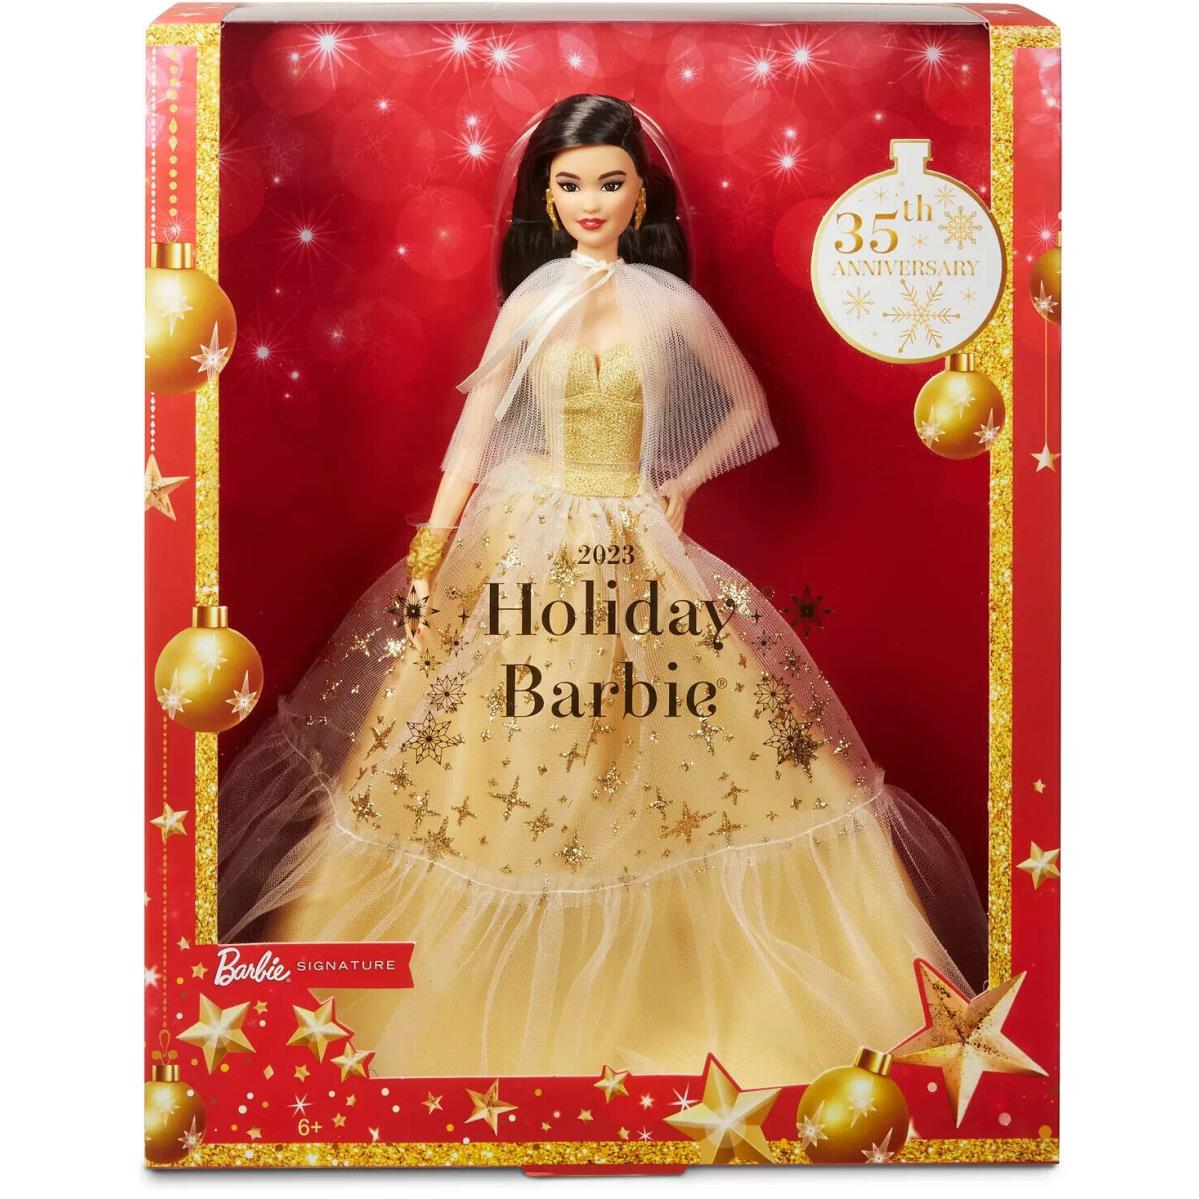 2023 Holiday Barbie Doll Black Hair Barbie Signature Golden Gown w/ Shipper Box